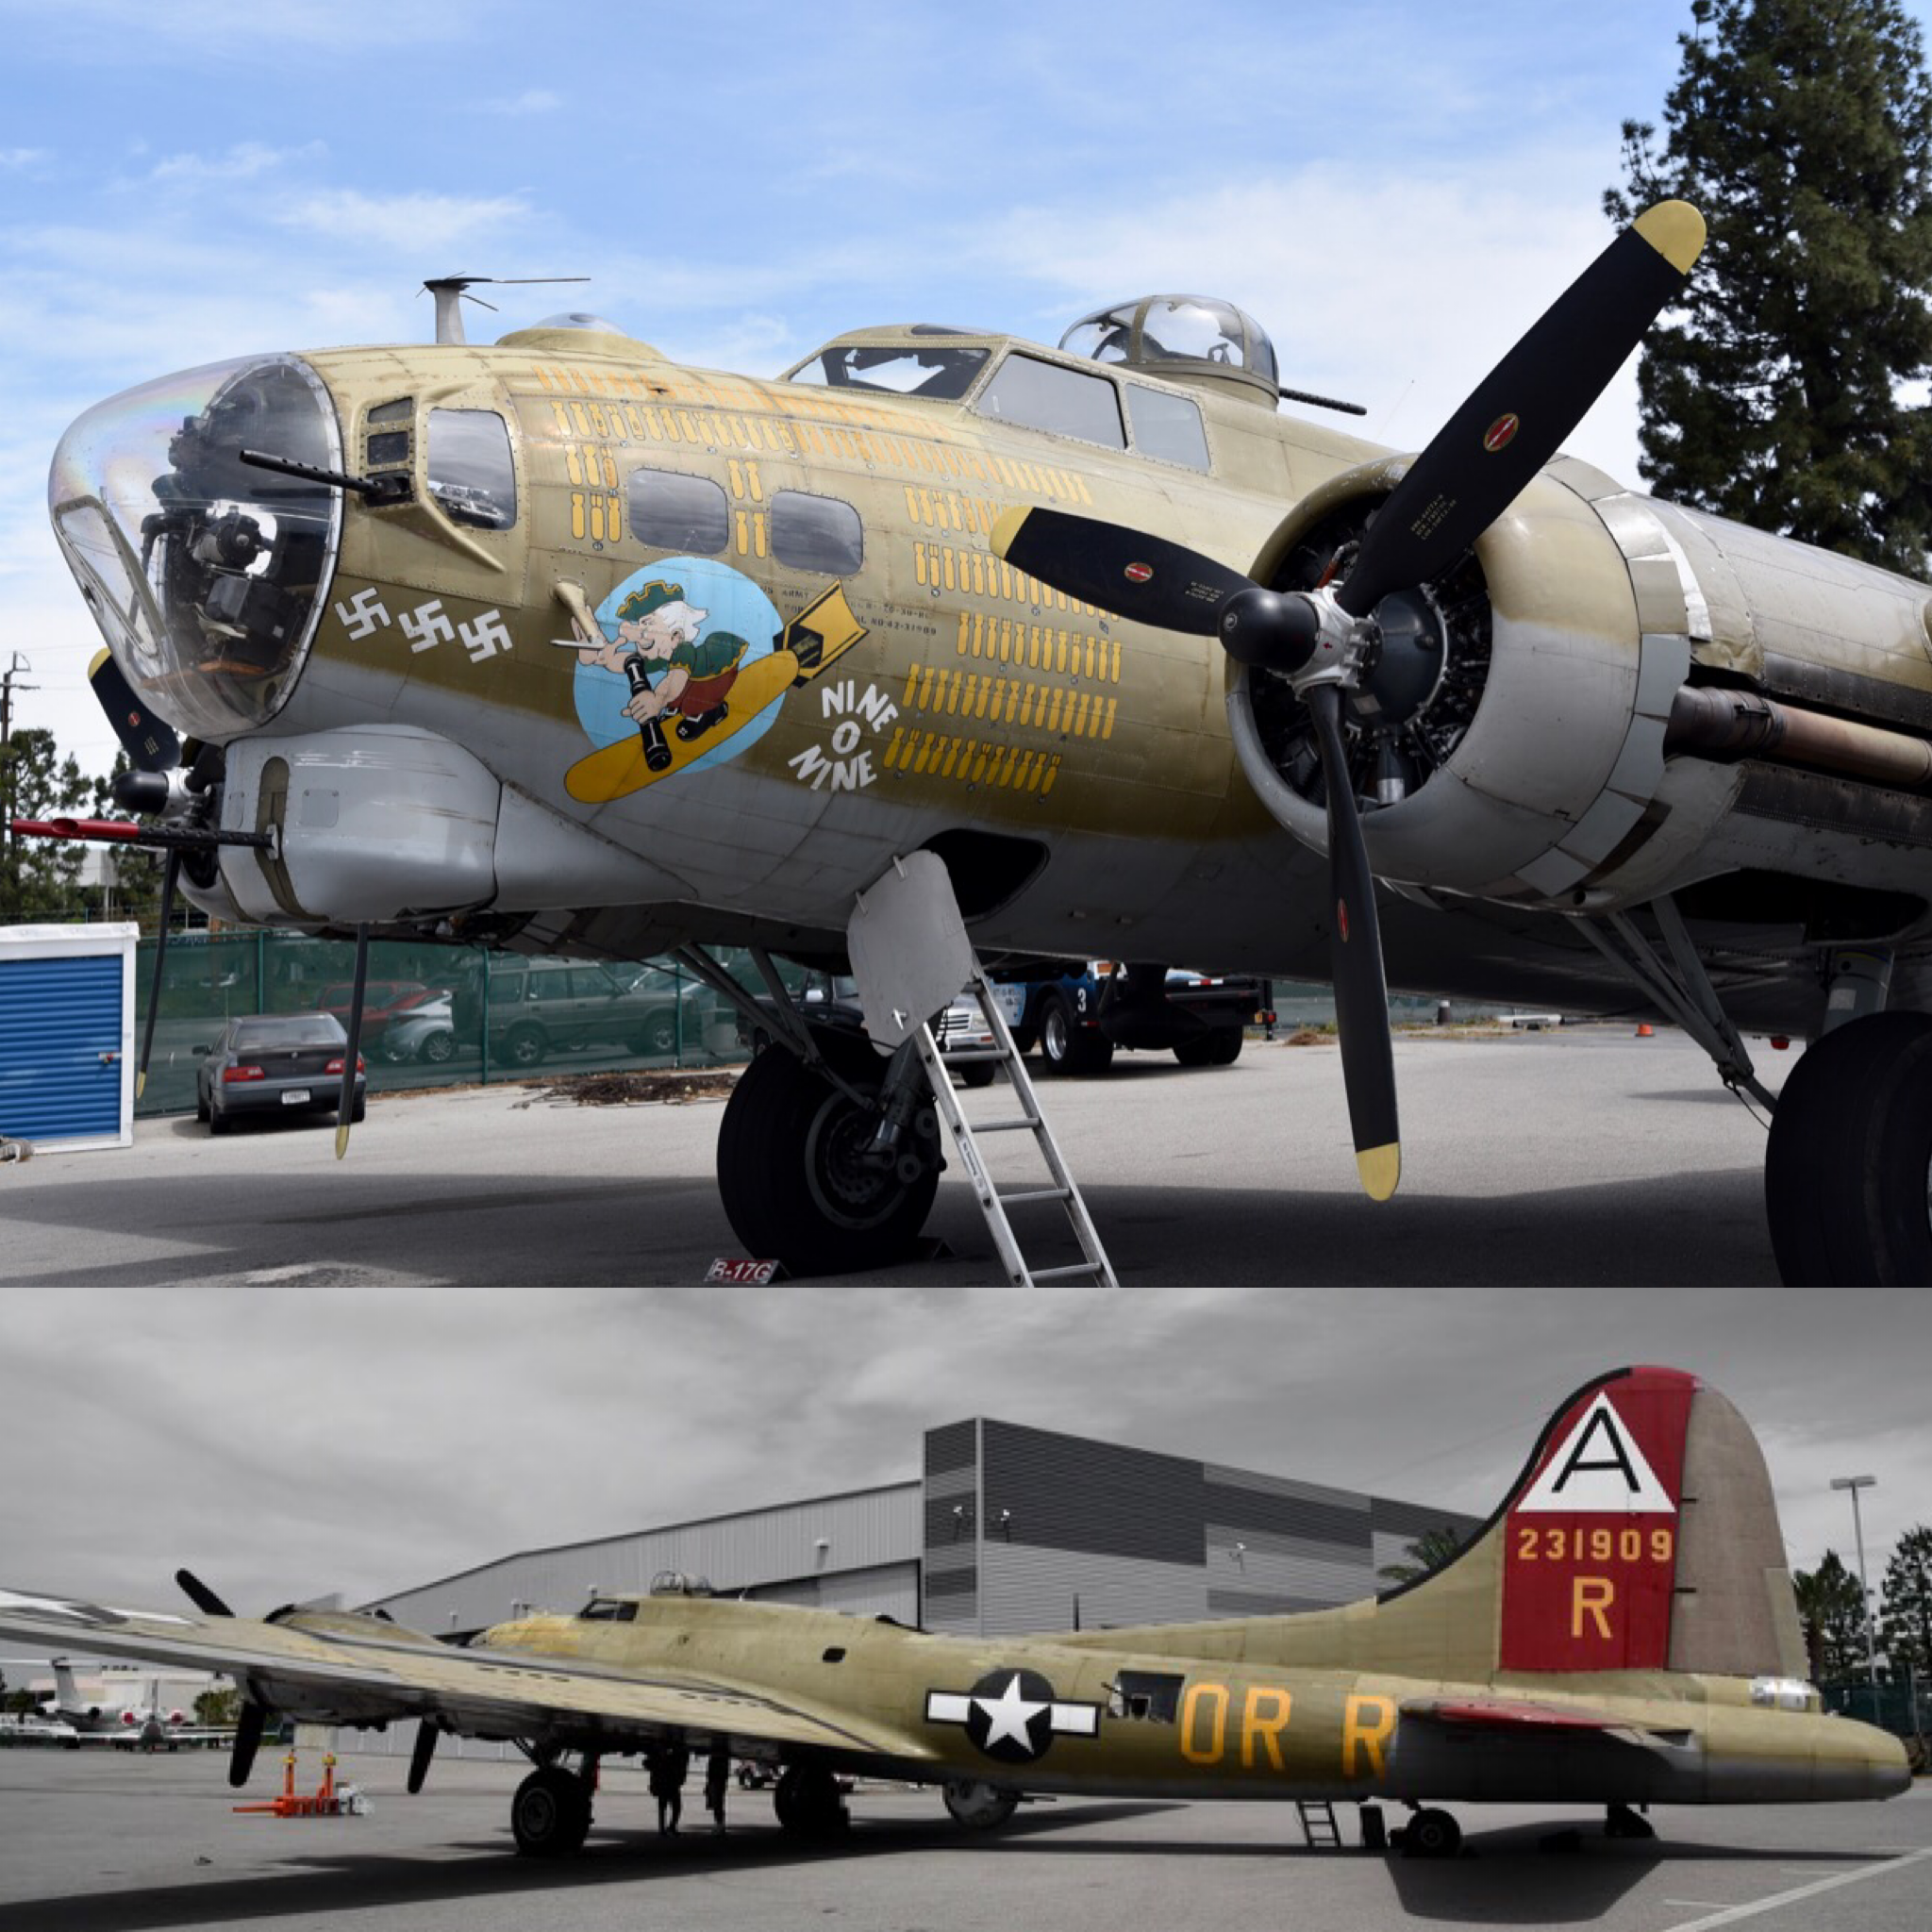 Collings Foundation B17 Flying Fortress